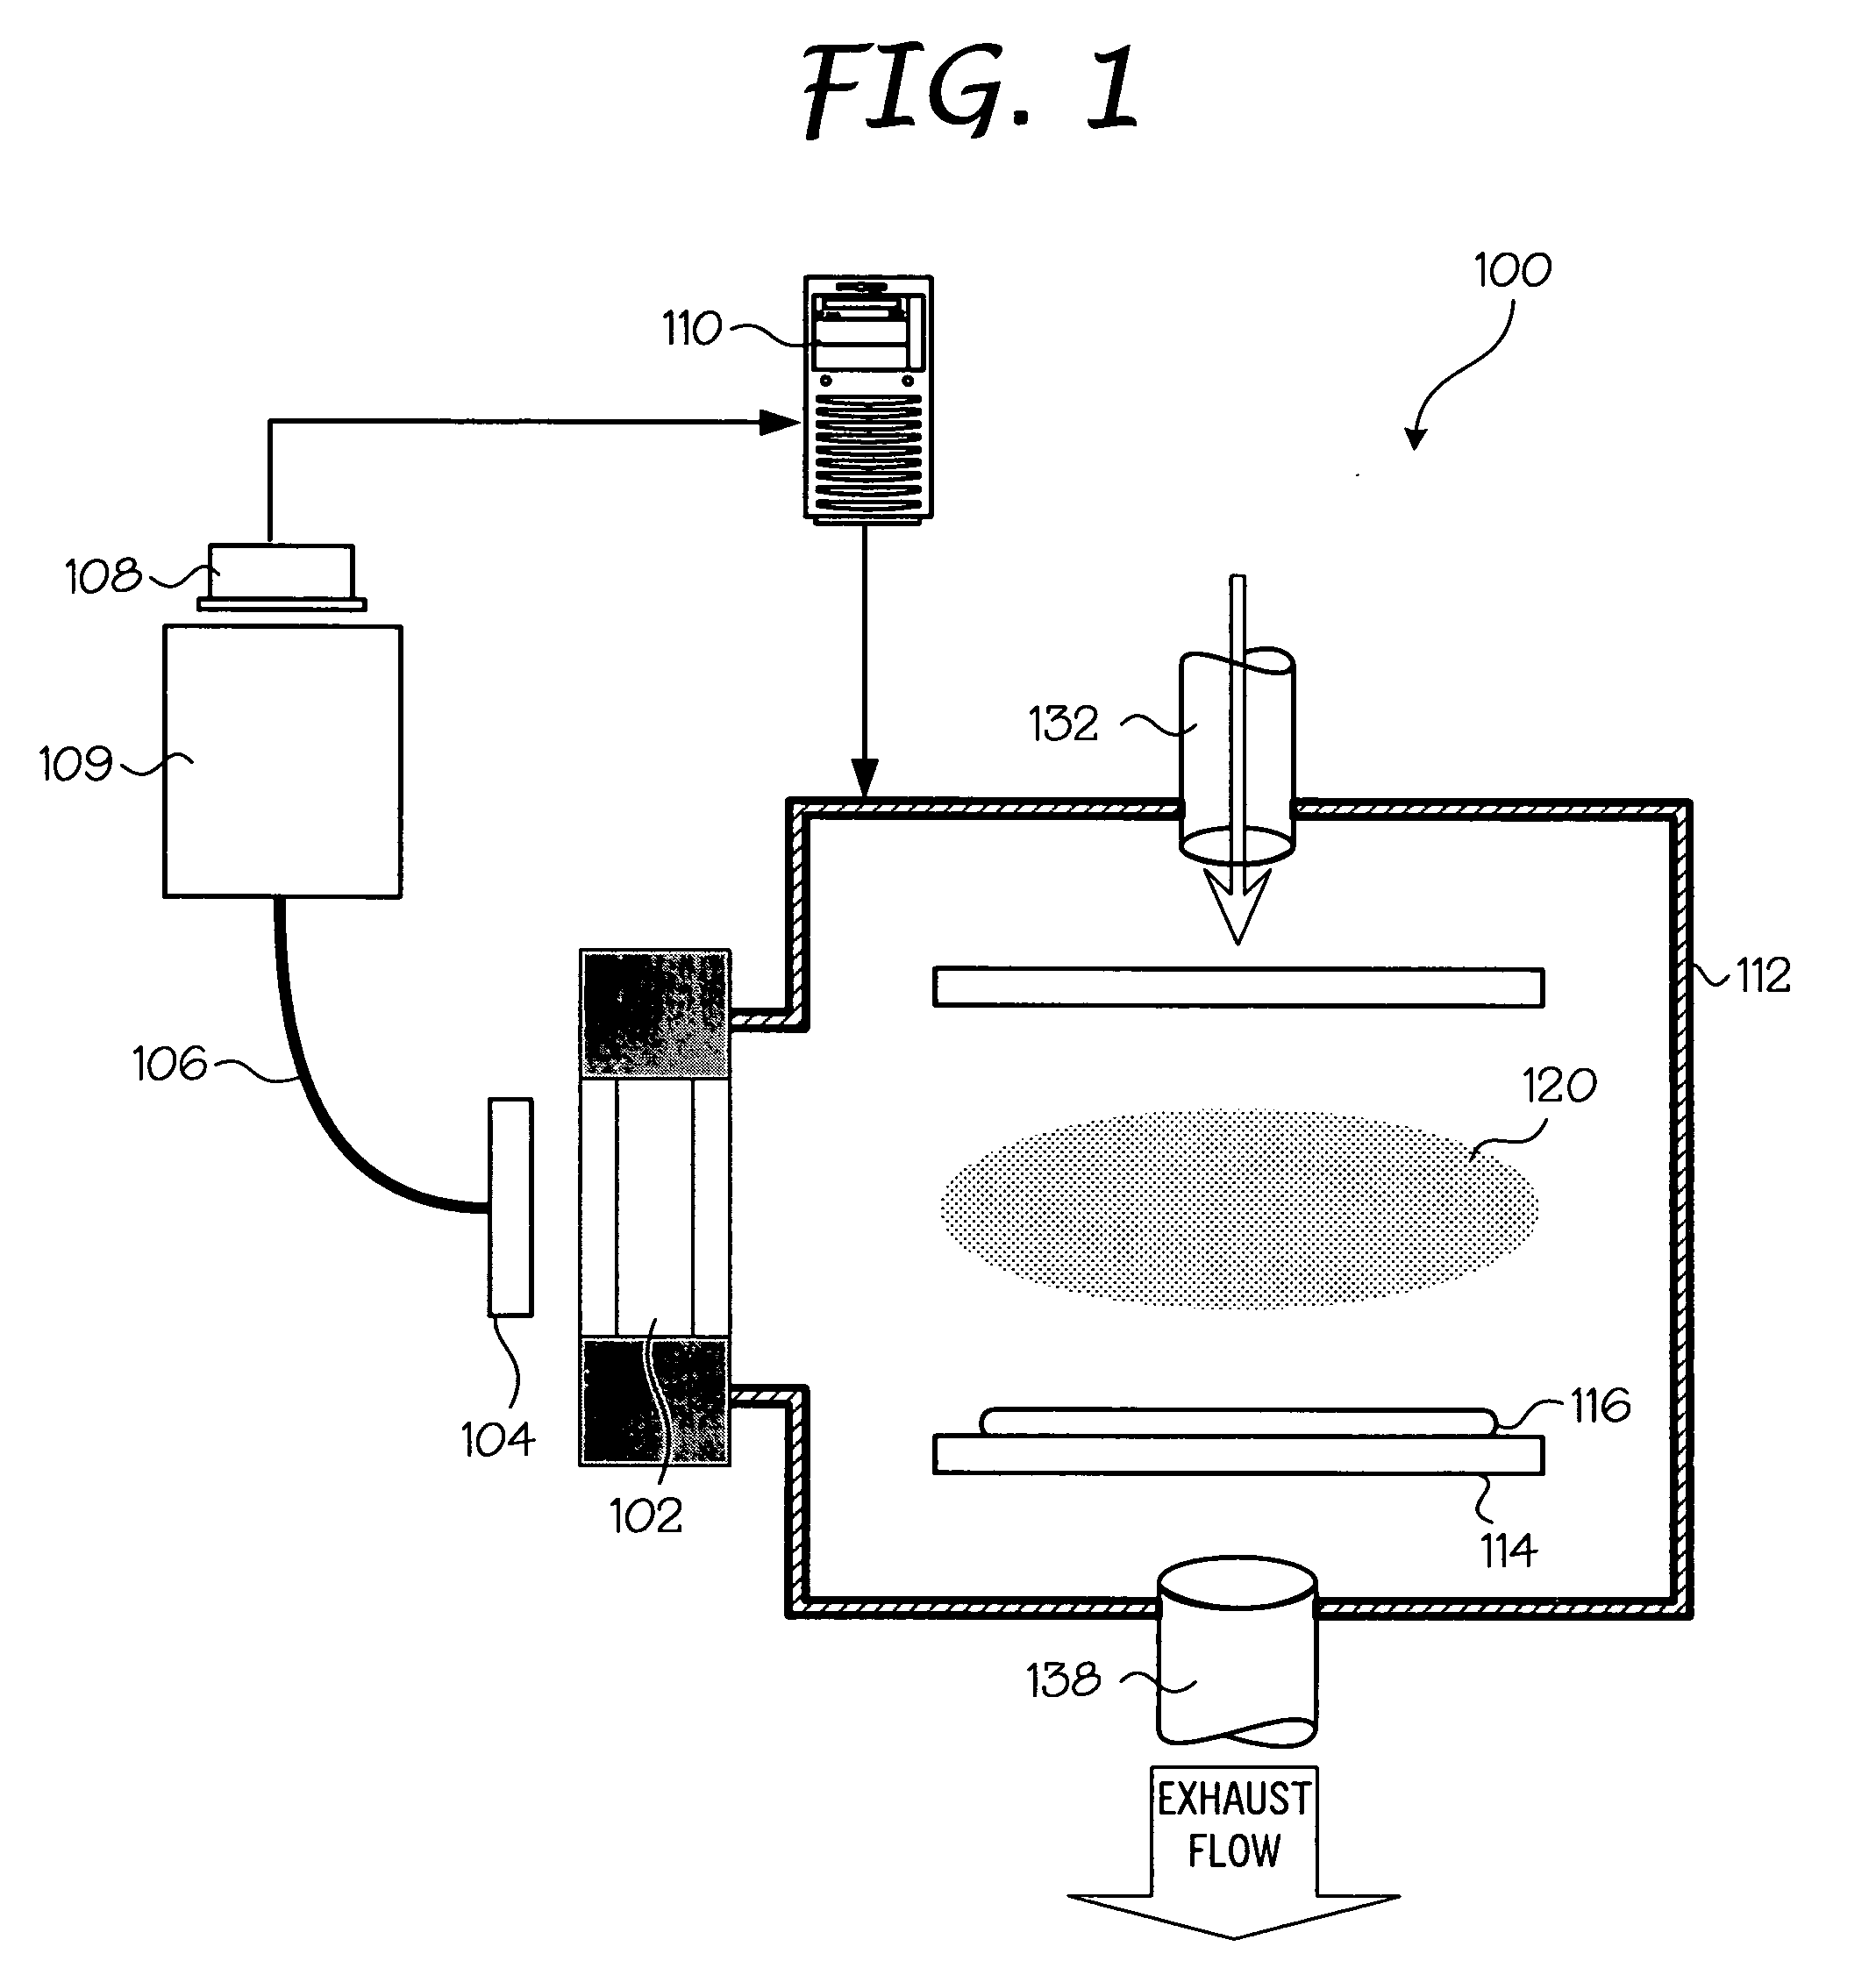 Electron beam exciter for use in chemical analysis in processing systems